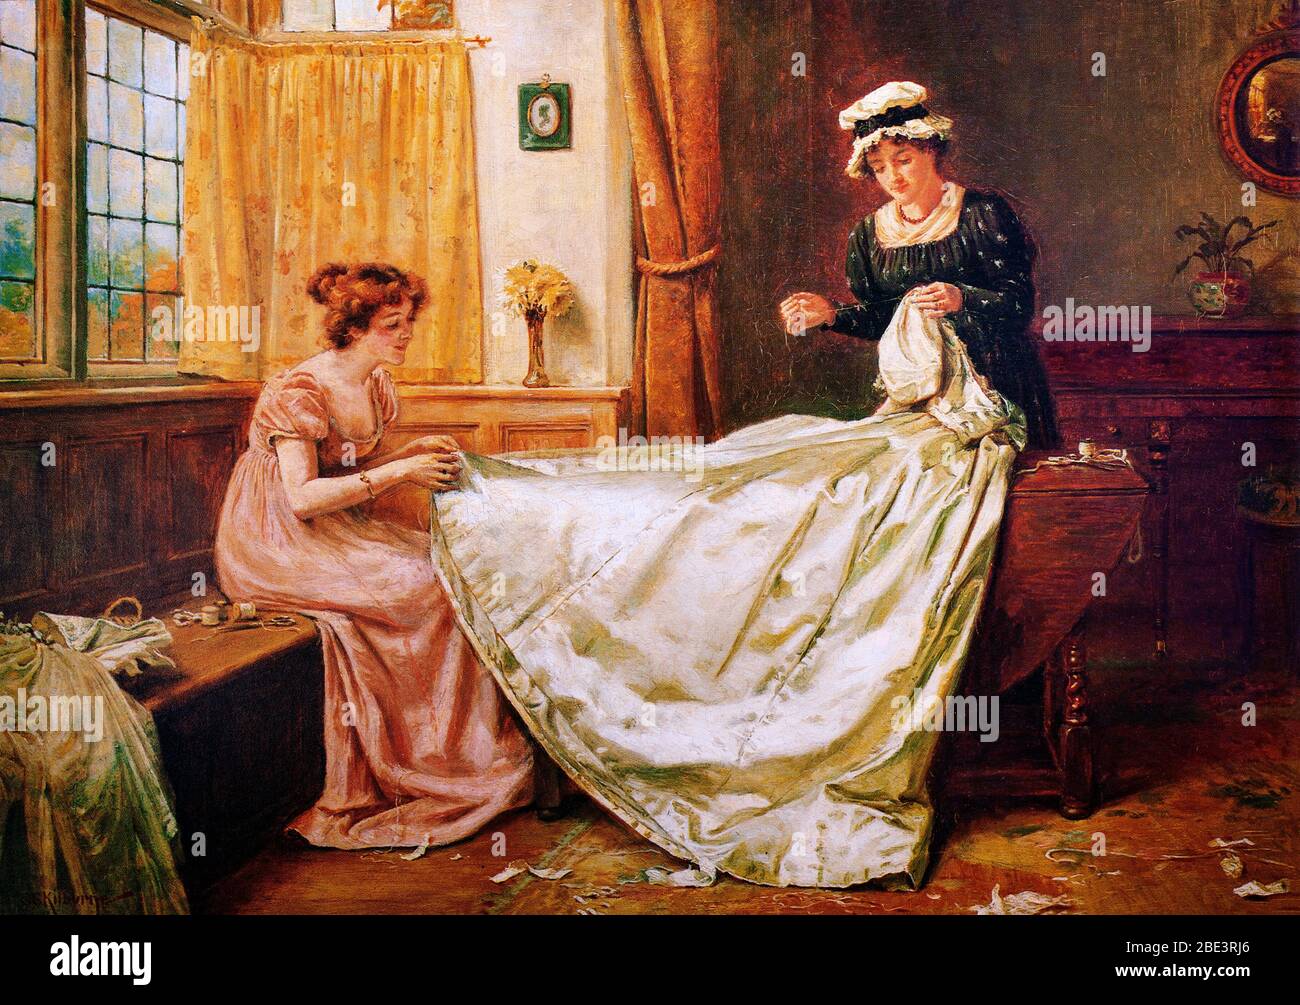 George Goodwin Kilburne (1839-1924) was an English genre painter specialising in accurately drawn interiors with figures. His  paintings often portrayed the upper classes and ultra-fashionable female beauties in opulent late 18th and early 19th-century settings. His depiction of this beauty was heightened by his attention to detail with dress, and richly decorated interiors. In this painting a woman and maid are putting the finishing touches to a wedding dress. Stock Photo